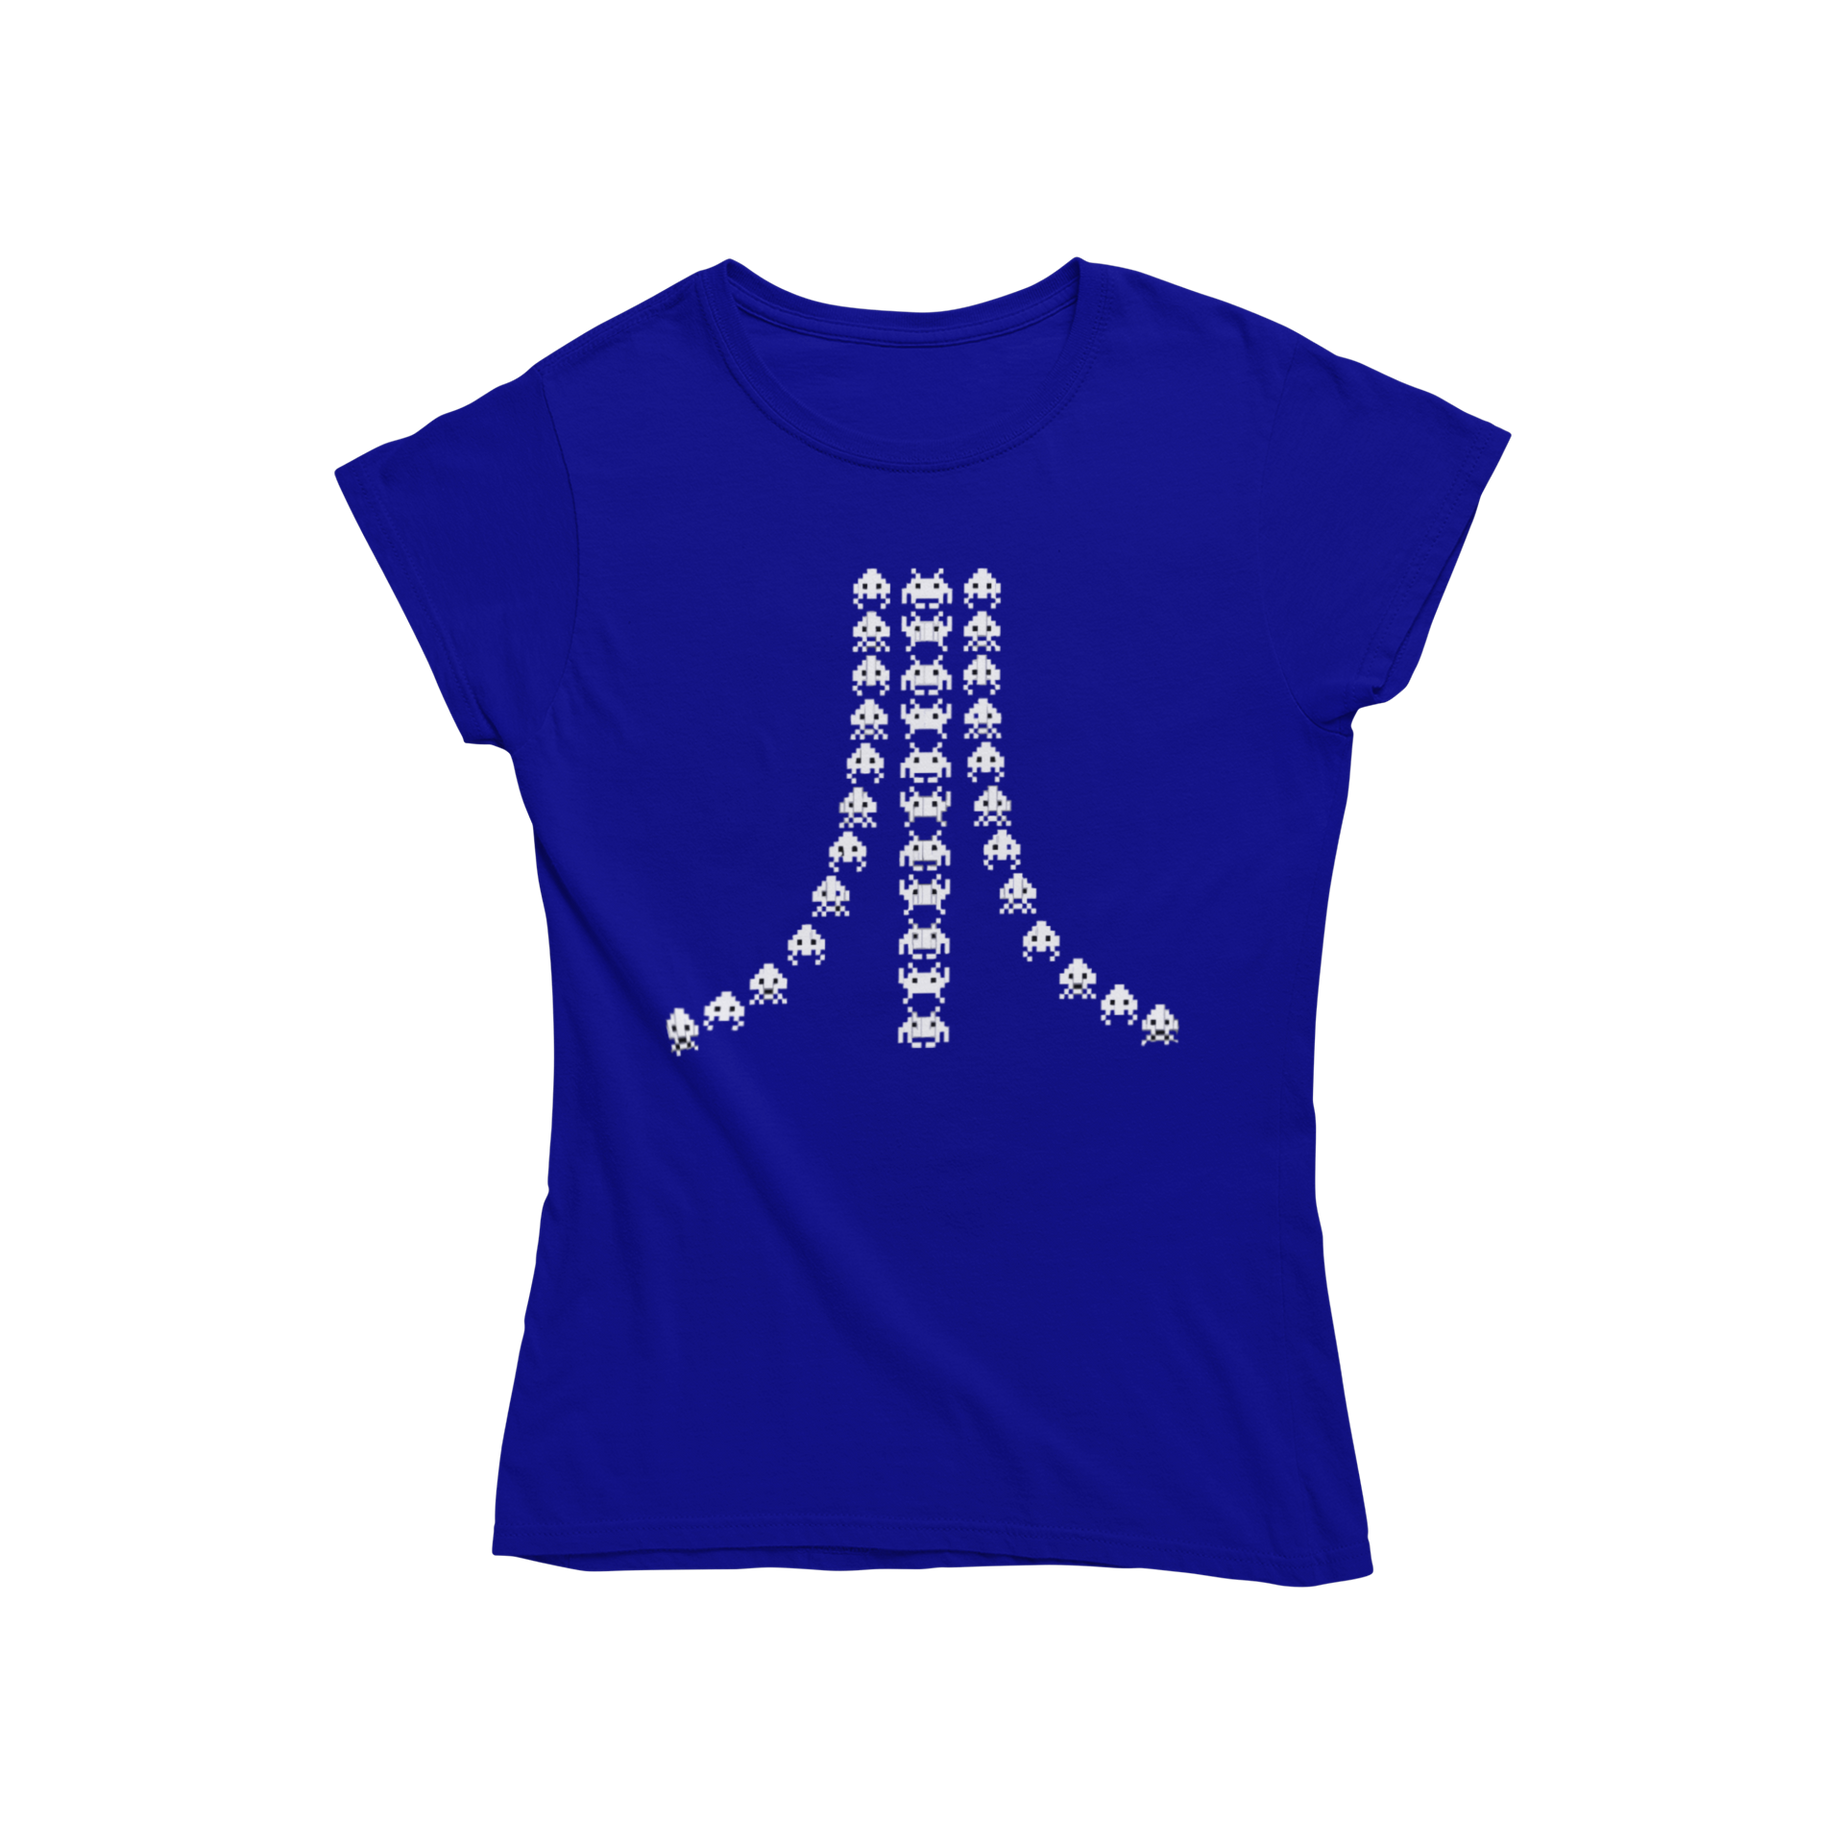 Attention retro gamers! Teevolution has the perfect addition to your wardrobe. Our Atari-inspired Space Invader print t-shirt is designed exclusively for the retro gamer girl. Shop now and level up your fashion game!